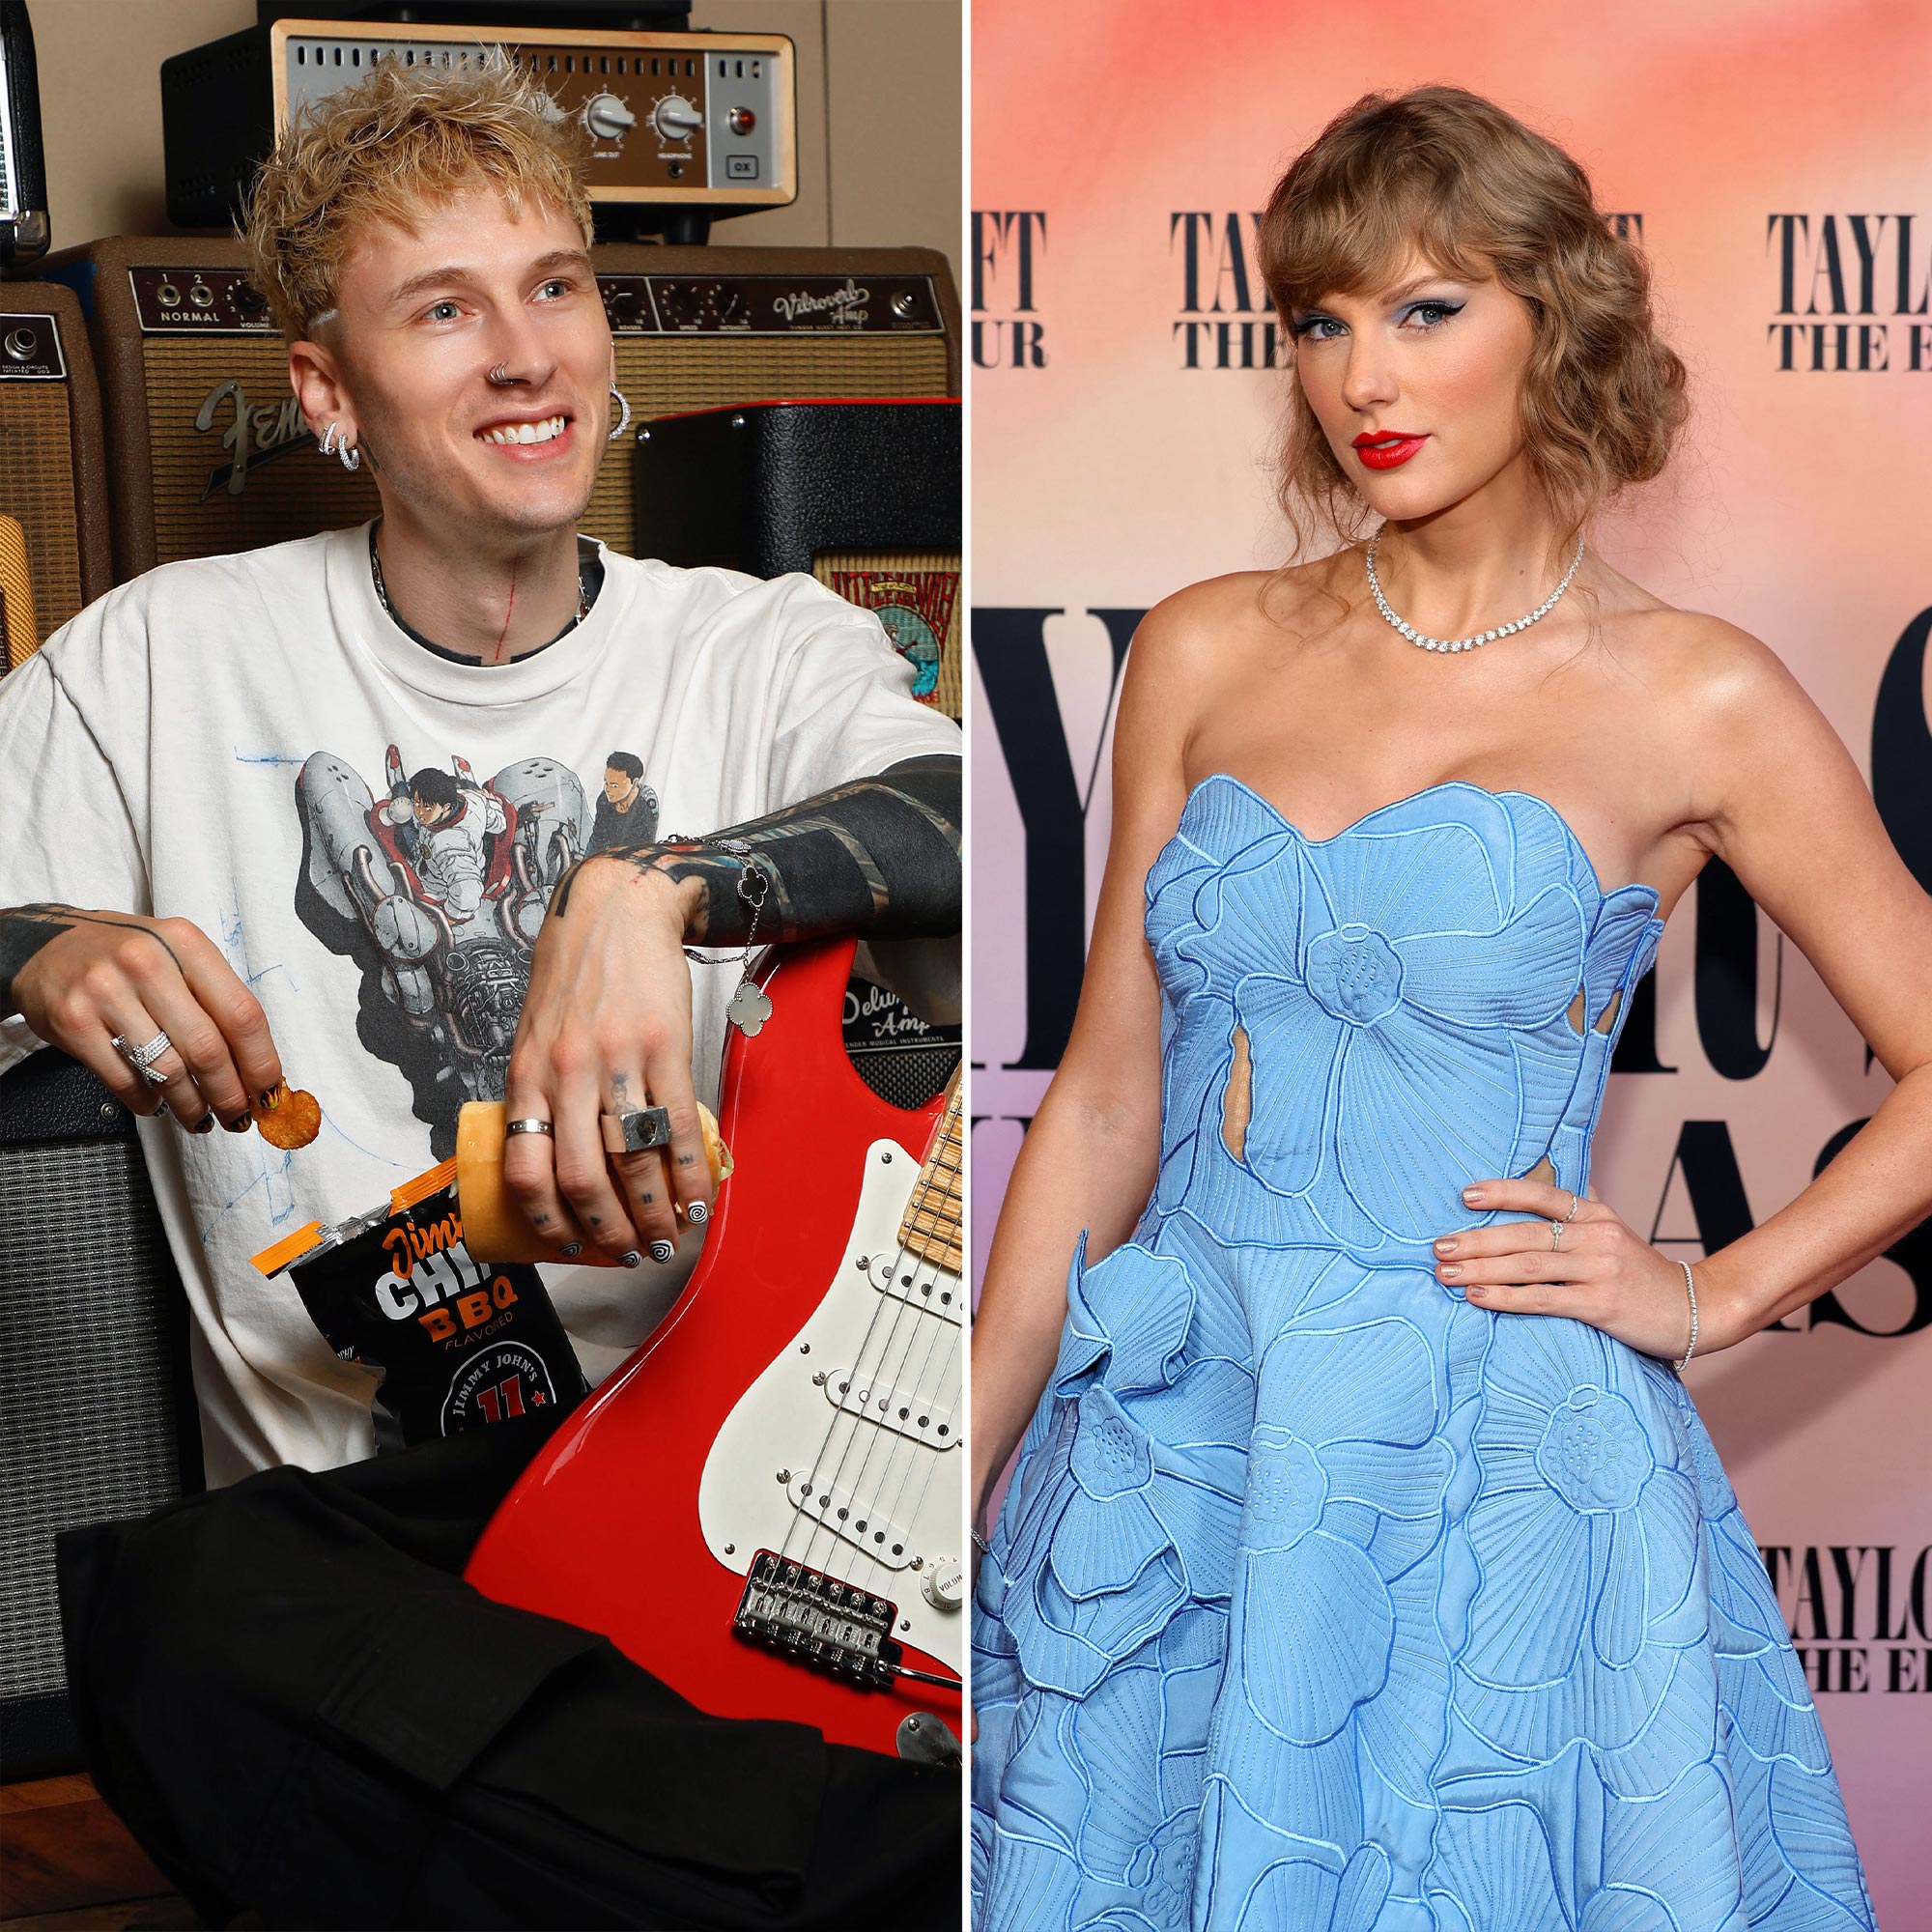 Machine Gun Kelly Is Dared to Say 3 Mean Things About Taylor Swift 181